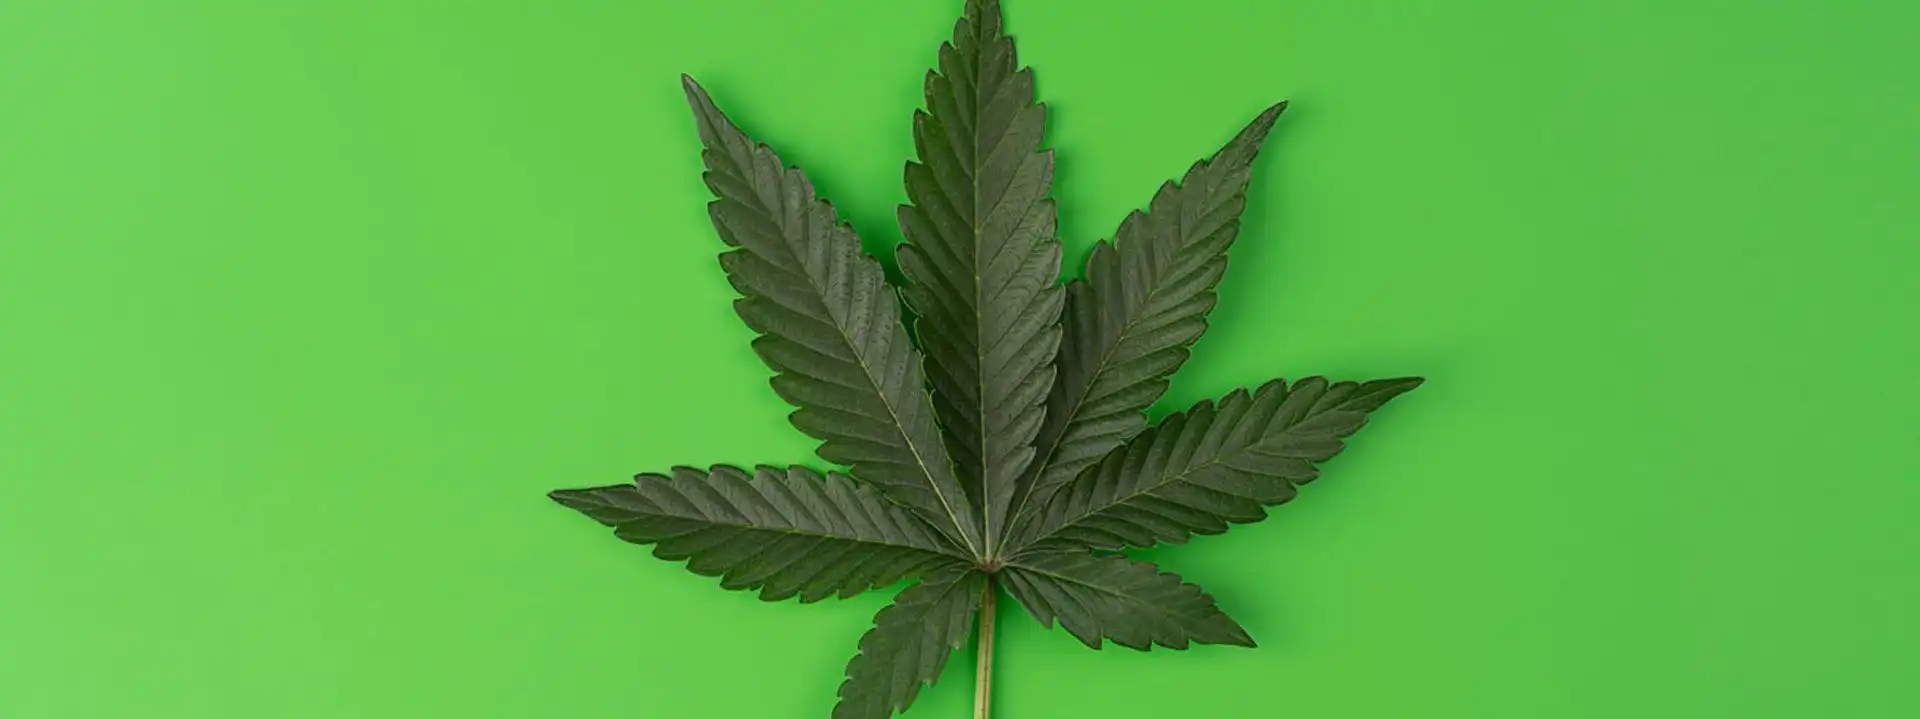 closeup of cannabis leaf on bright green background